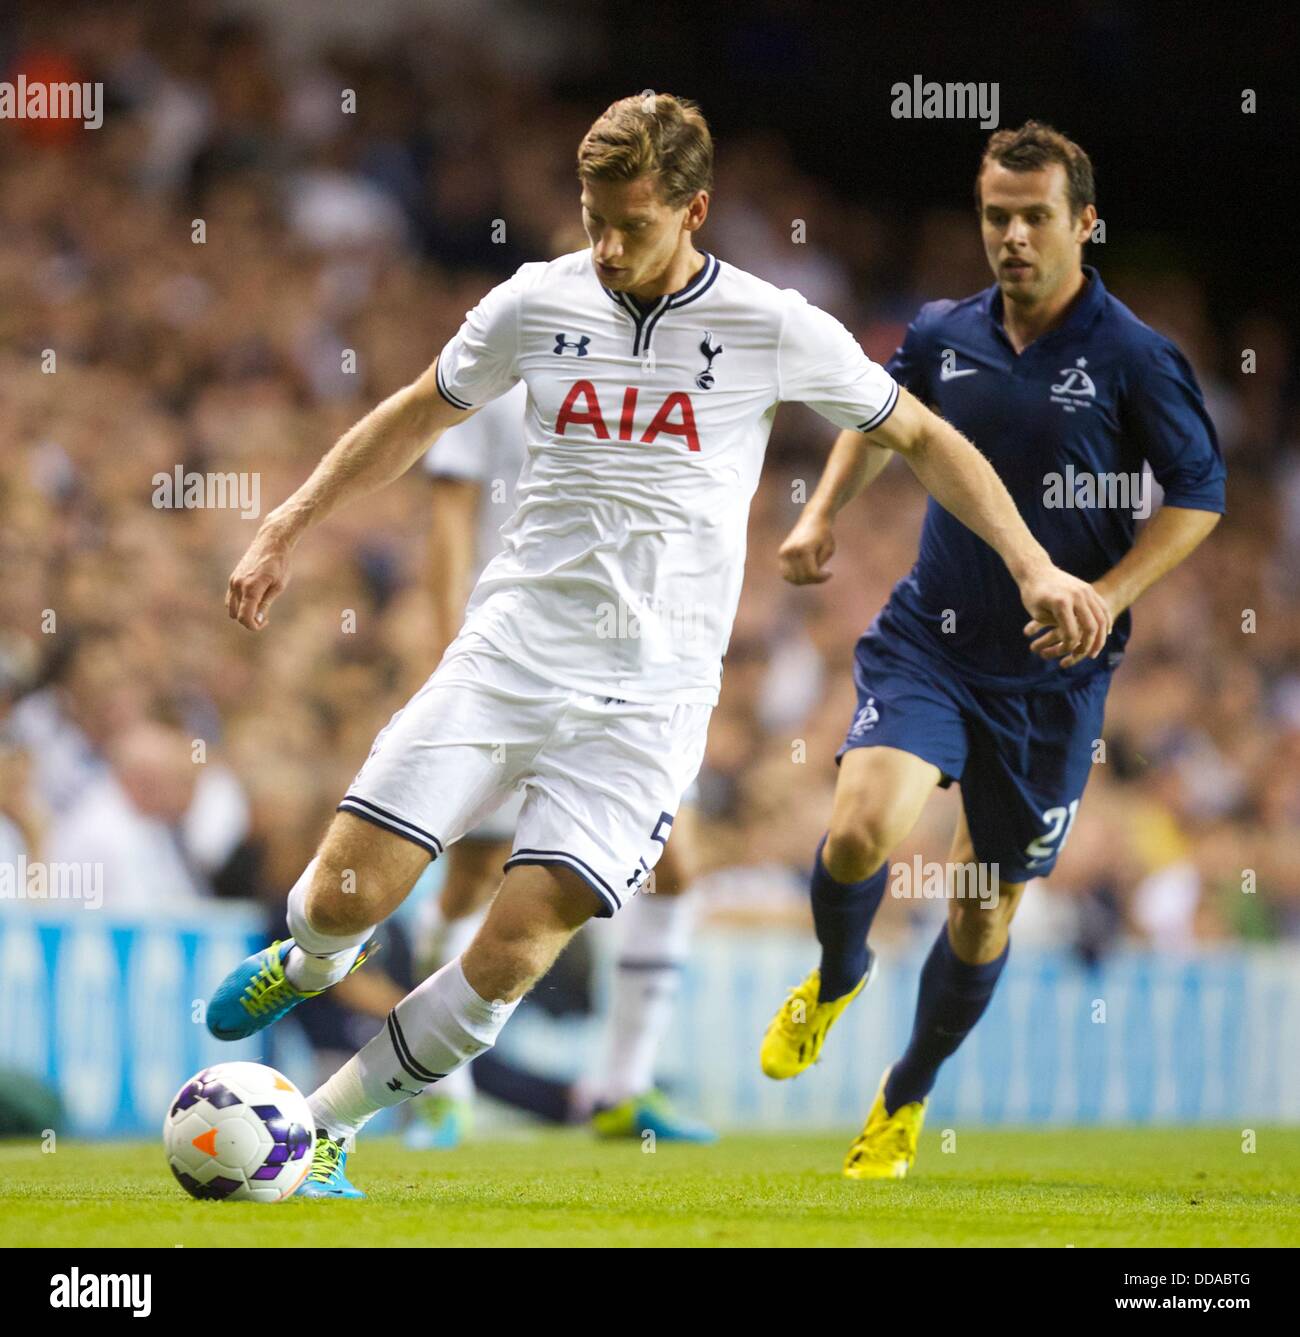 London, UK. 29th Aug, 2013. Jan Vertonghen of Tottenham during the Europa League play off 2nd leg between Tottenham Hotspur and Dinamo Tbilisi from White Hart Lane. Credit:  Action Plus Sports/Alamy Live News Stock Photo